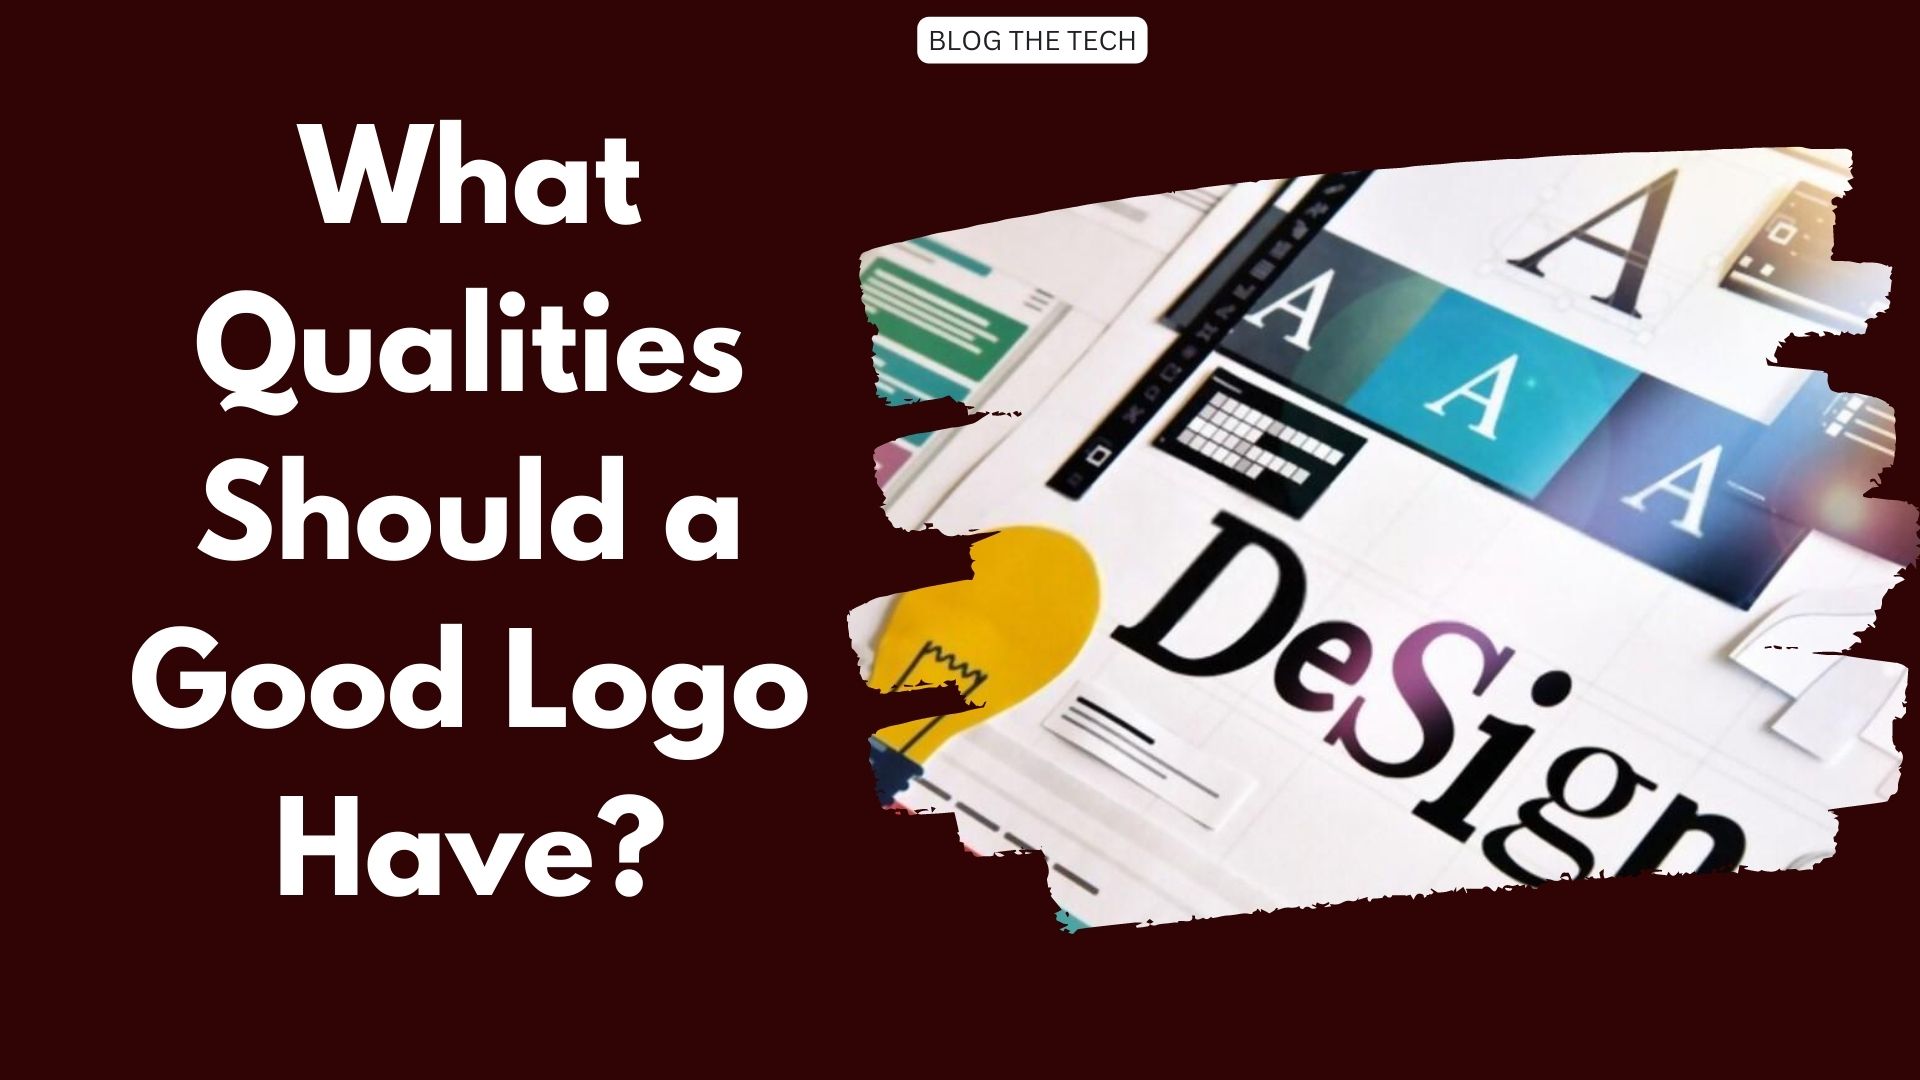 What Qualities Should a Good Logo Have?